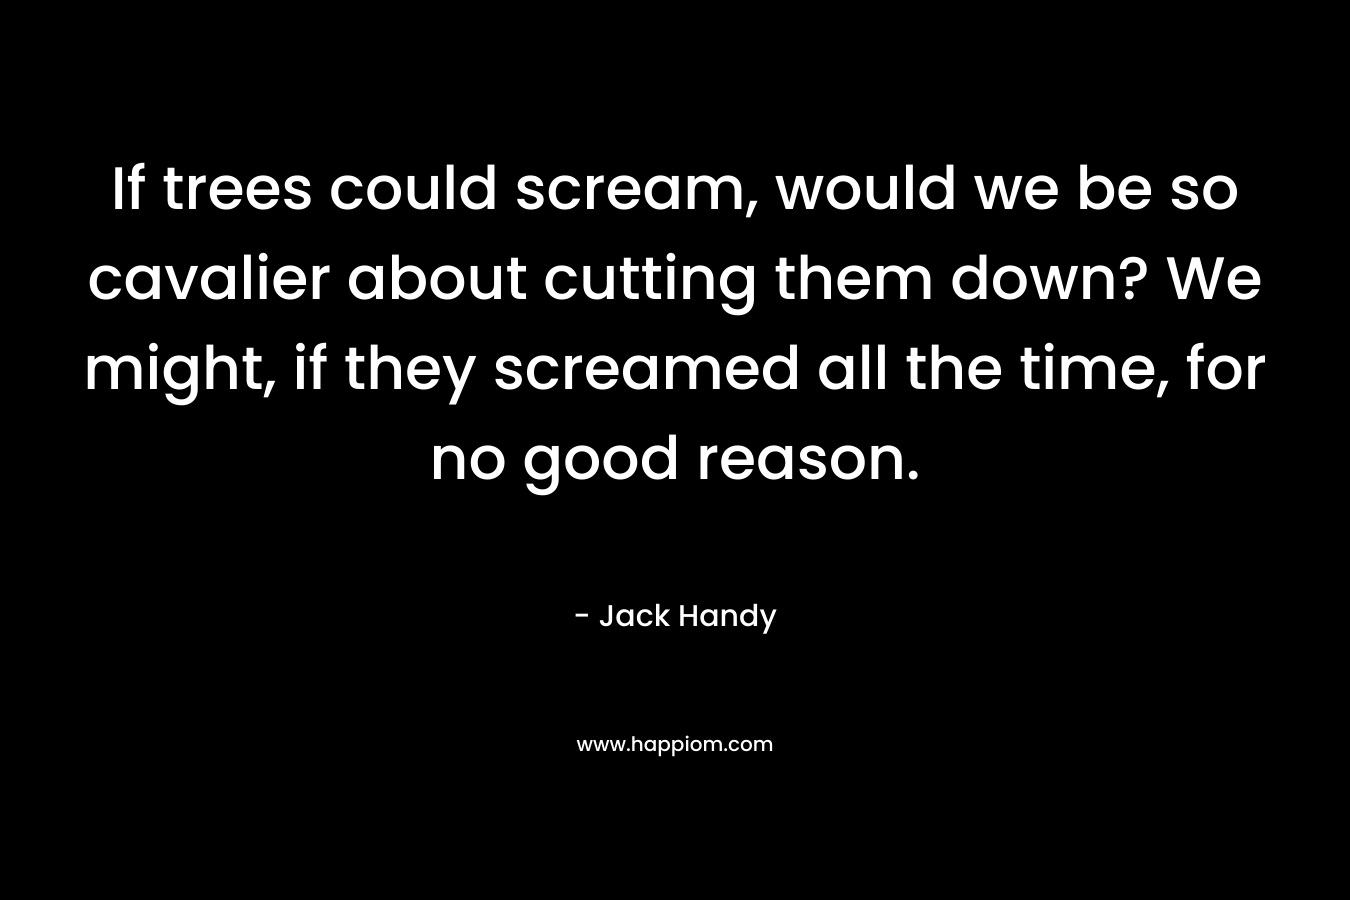 If trees could scream, would we be so cavalier about cutting them down? We might, if they screamed all the time, for no good reason. – Jack Handy